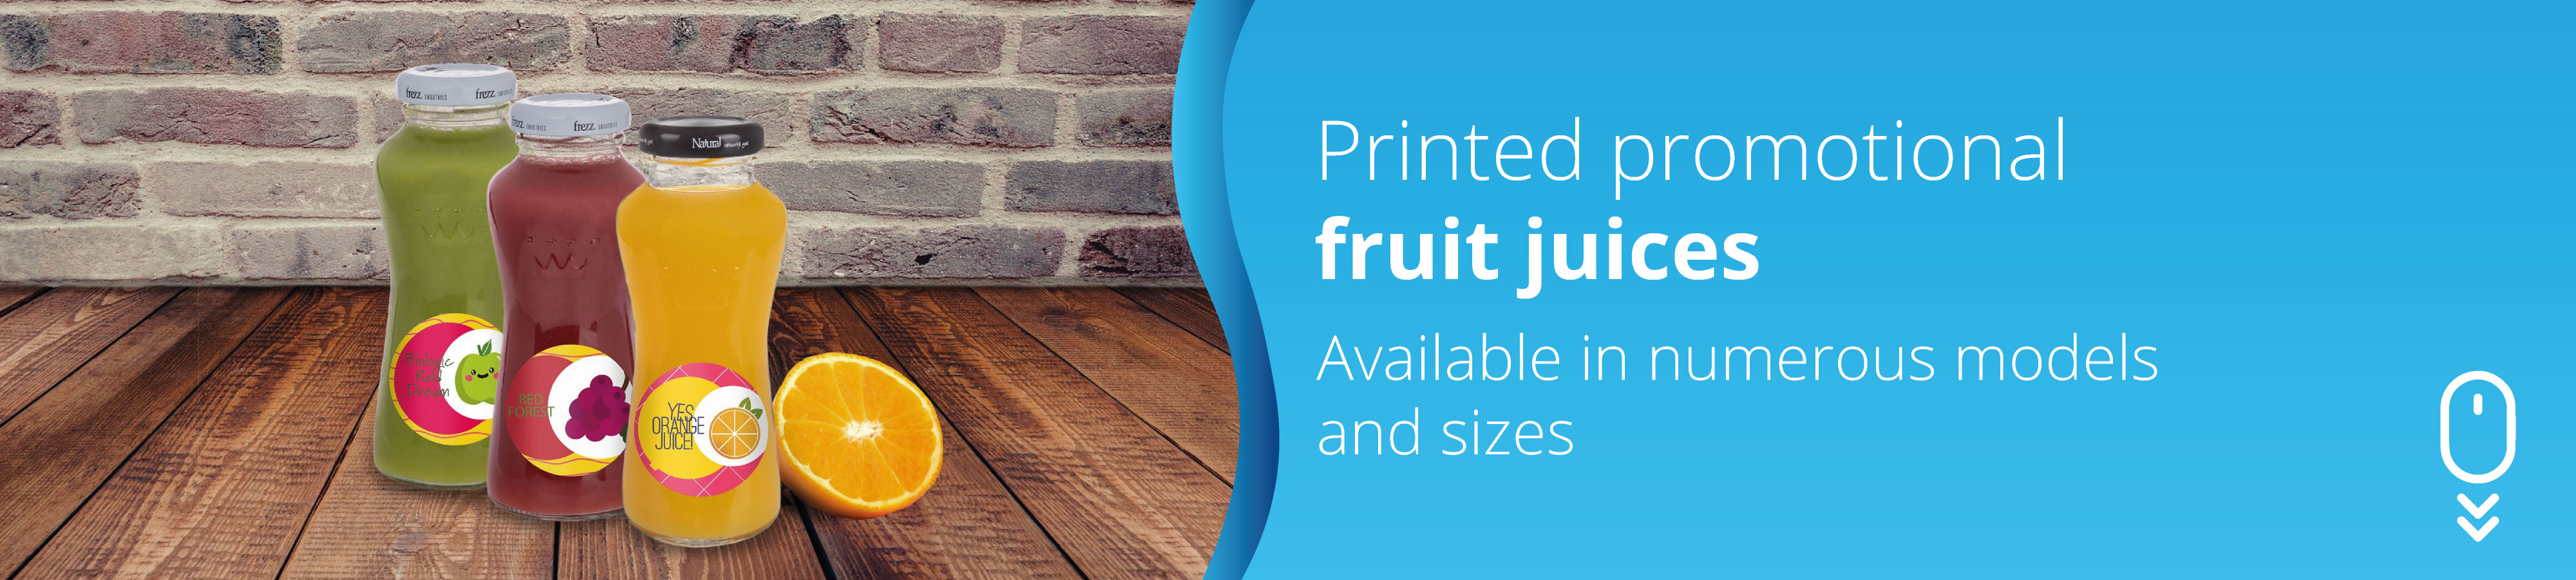 printed-promotional-fruit-juicespbQwvDtpwyrUC